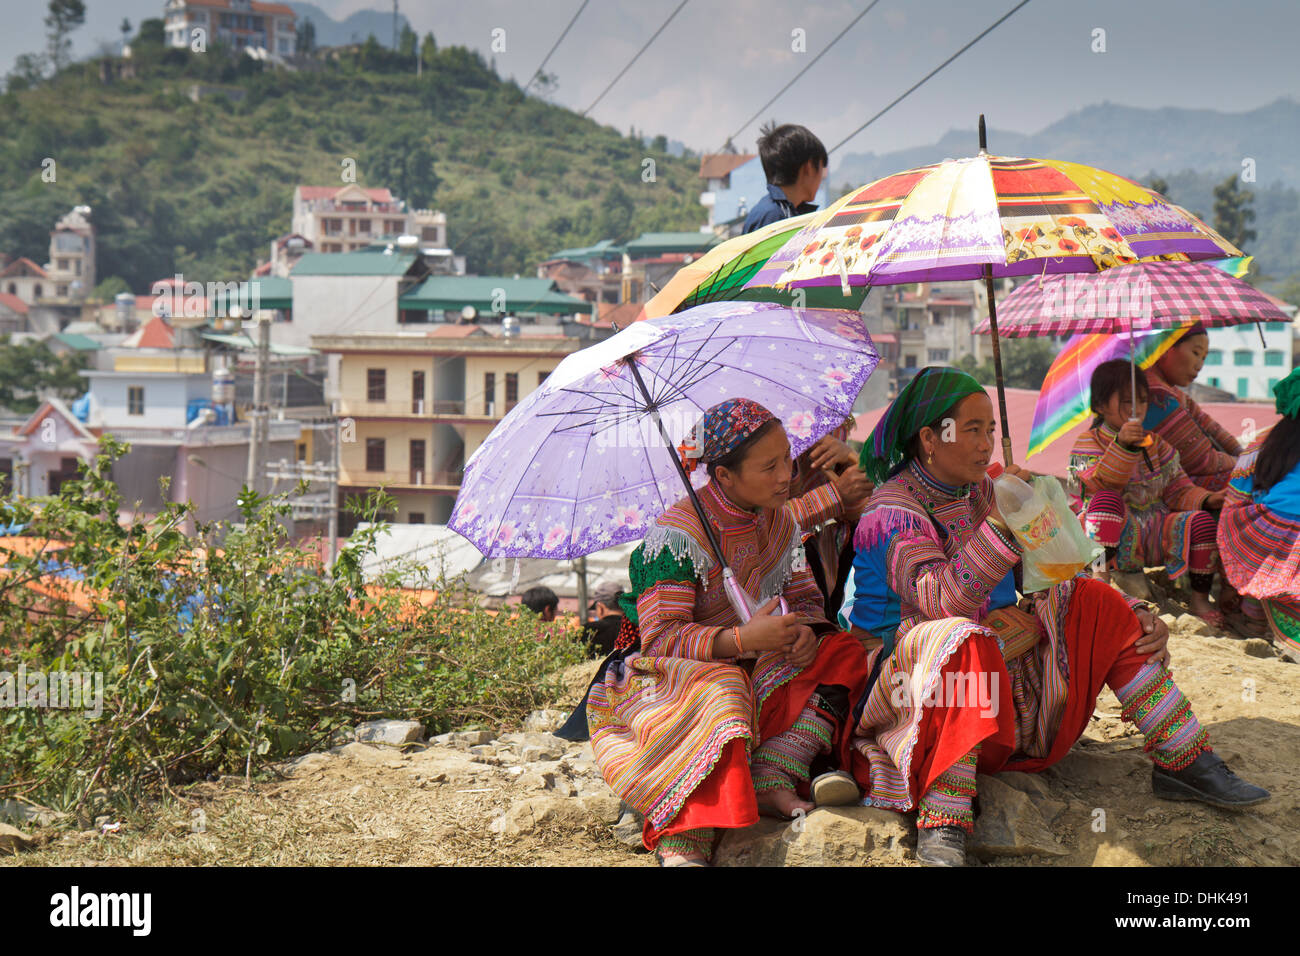 Young Vietnamese women at Bac Ha Market using umbrellas to shield themselves from the strong sun. Stock Photo